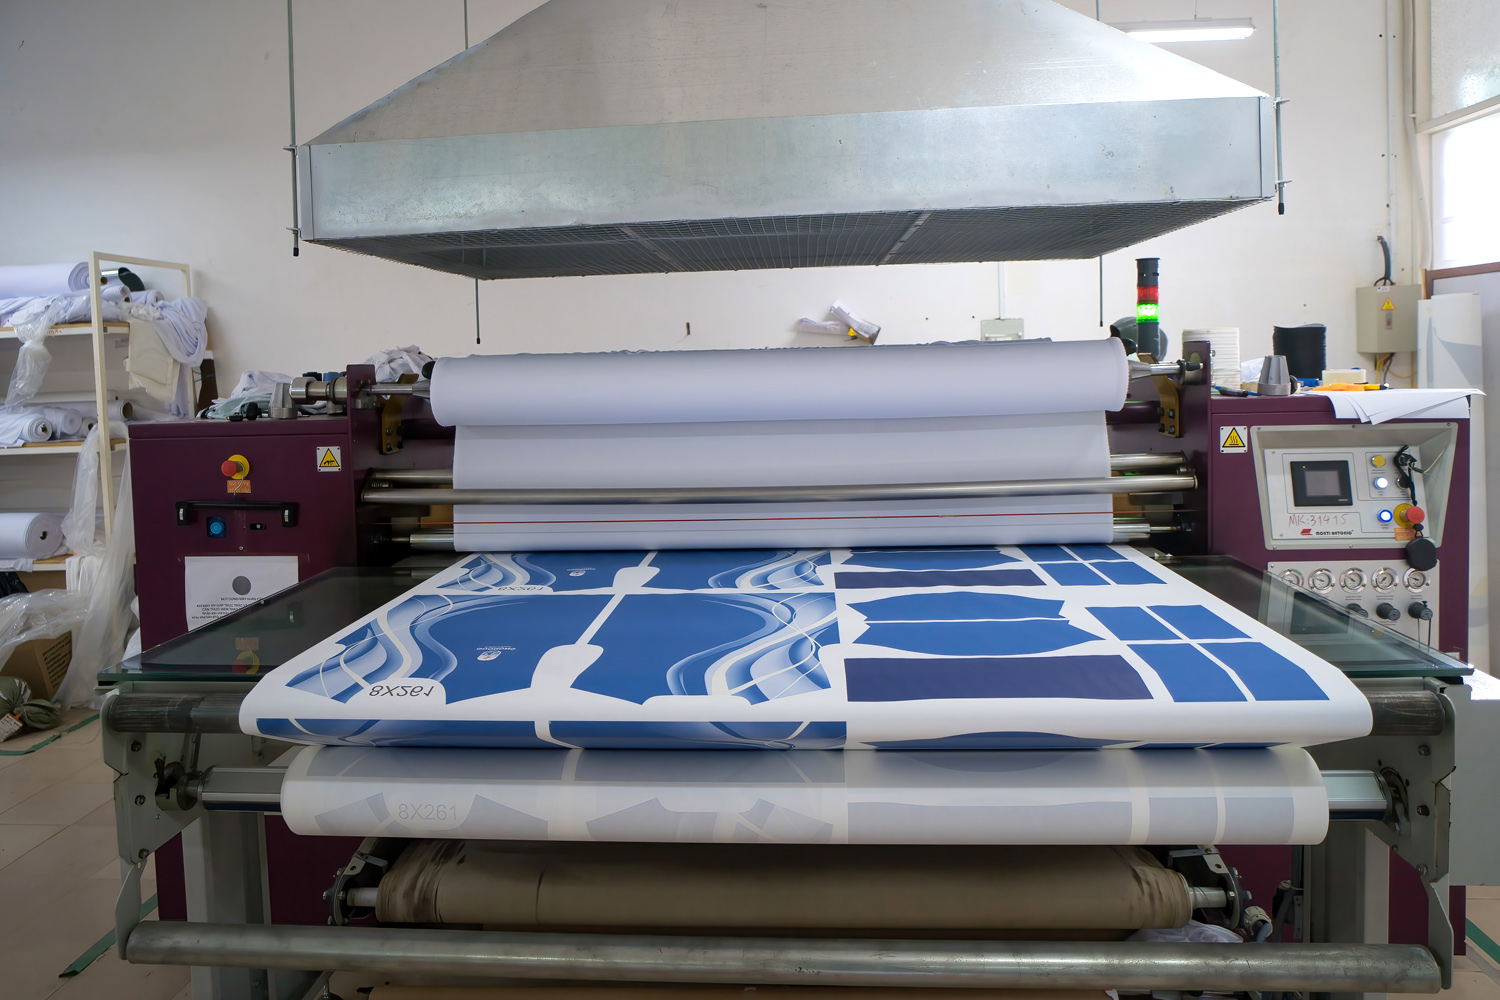 Heat transfer machine transferring print from paper to fabric for custom apparel.